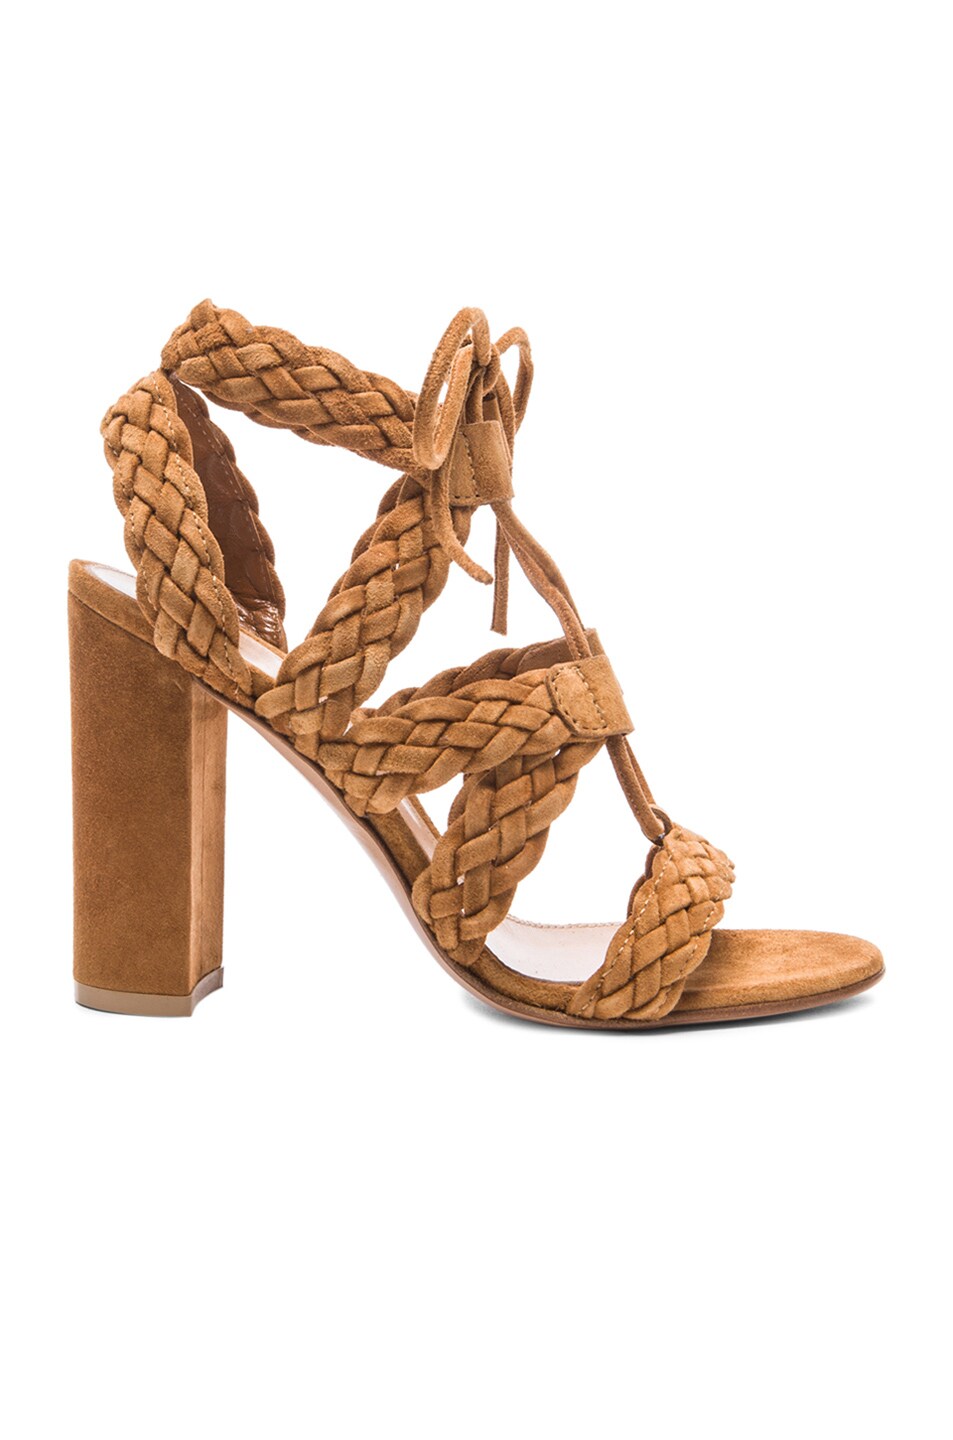 Image 1 of Gianvito Rossi Braided Suede Heels in Almond Suede